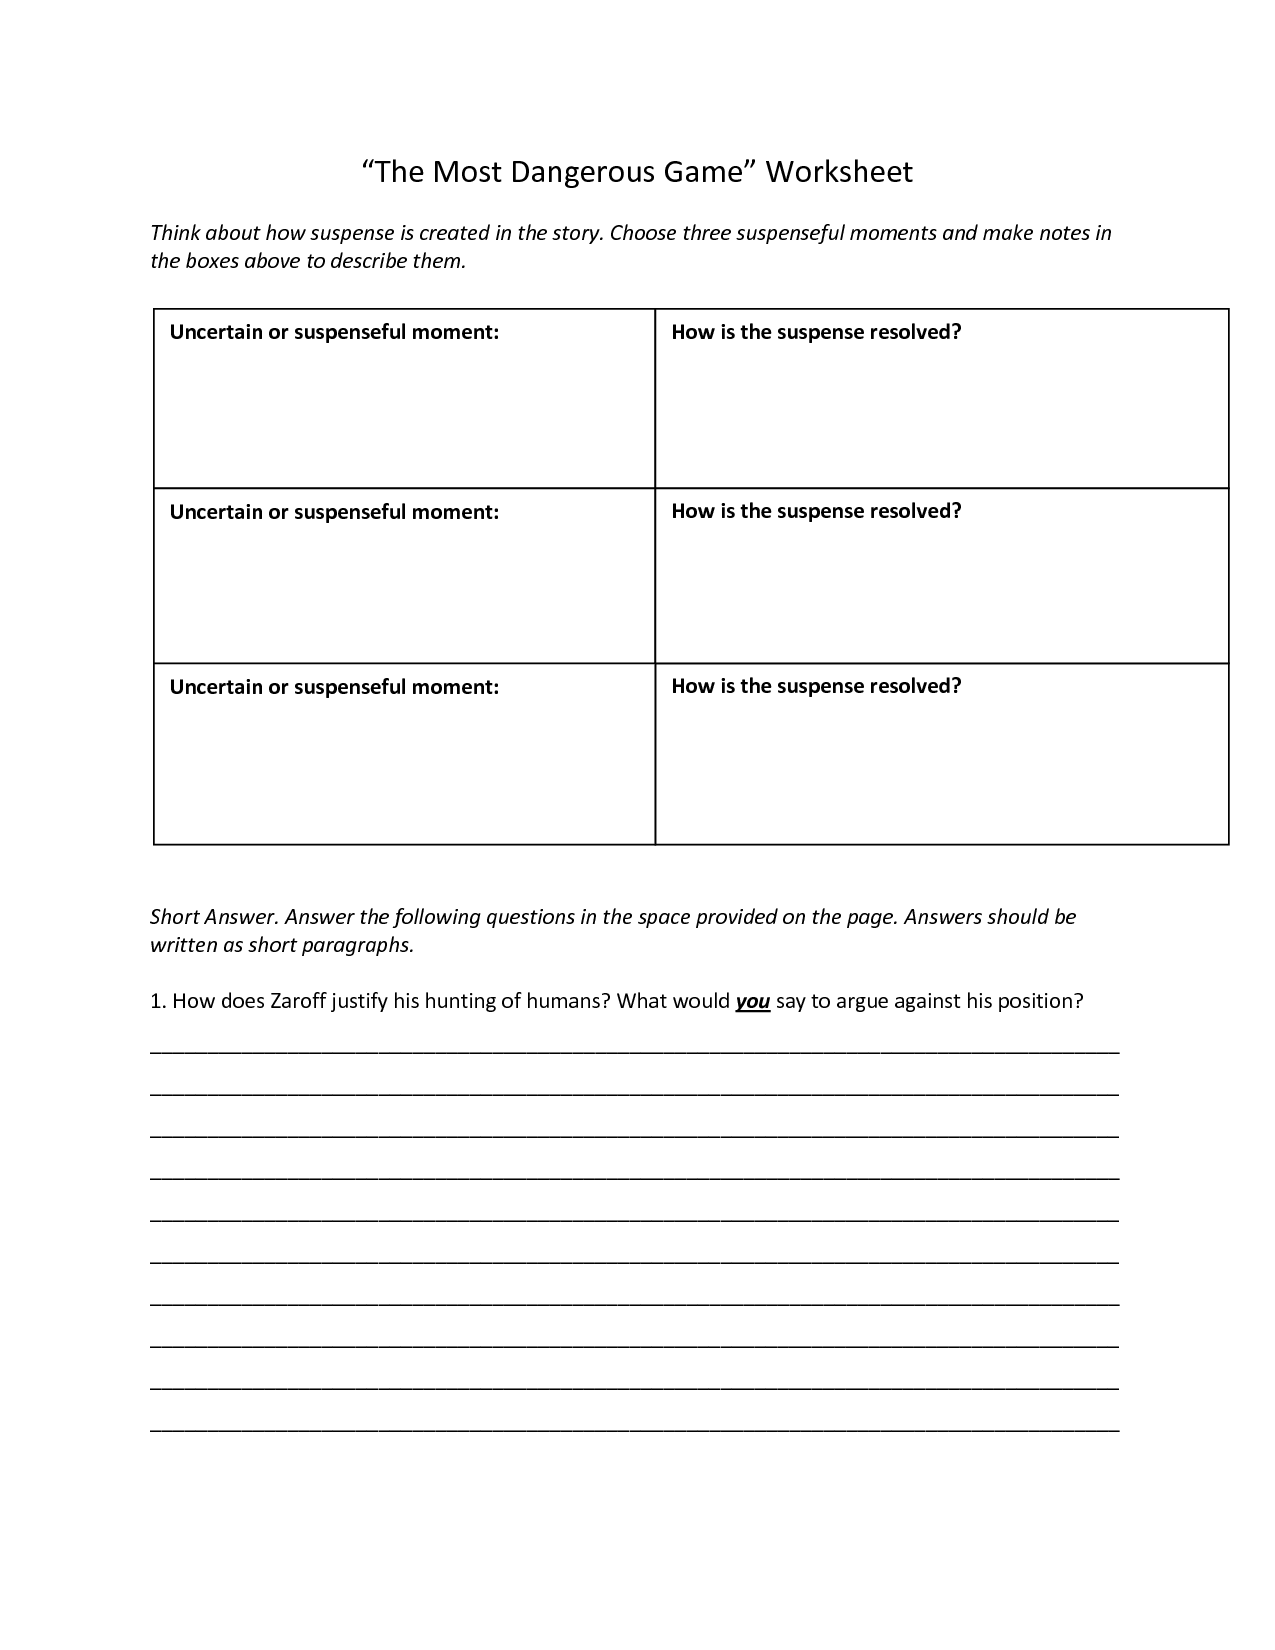 Most Dangerous Game Worksheet Answers Image